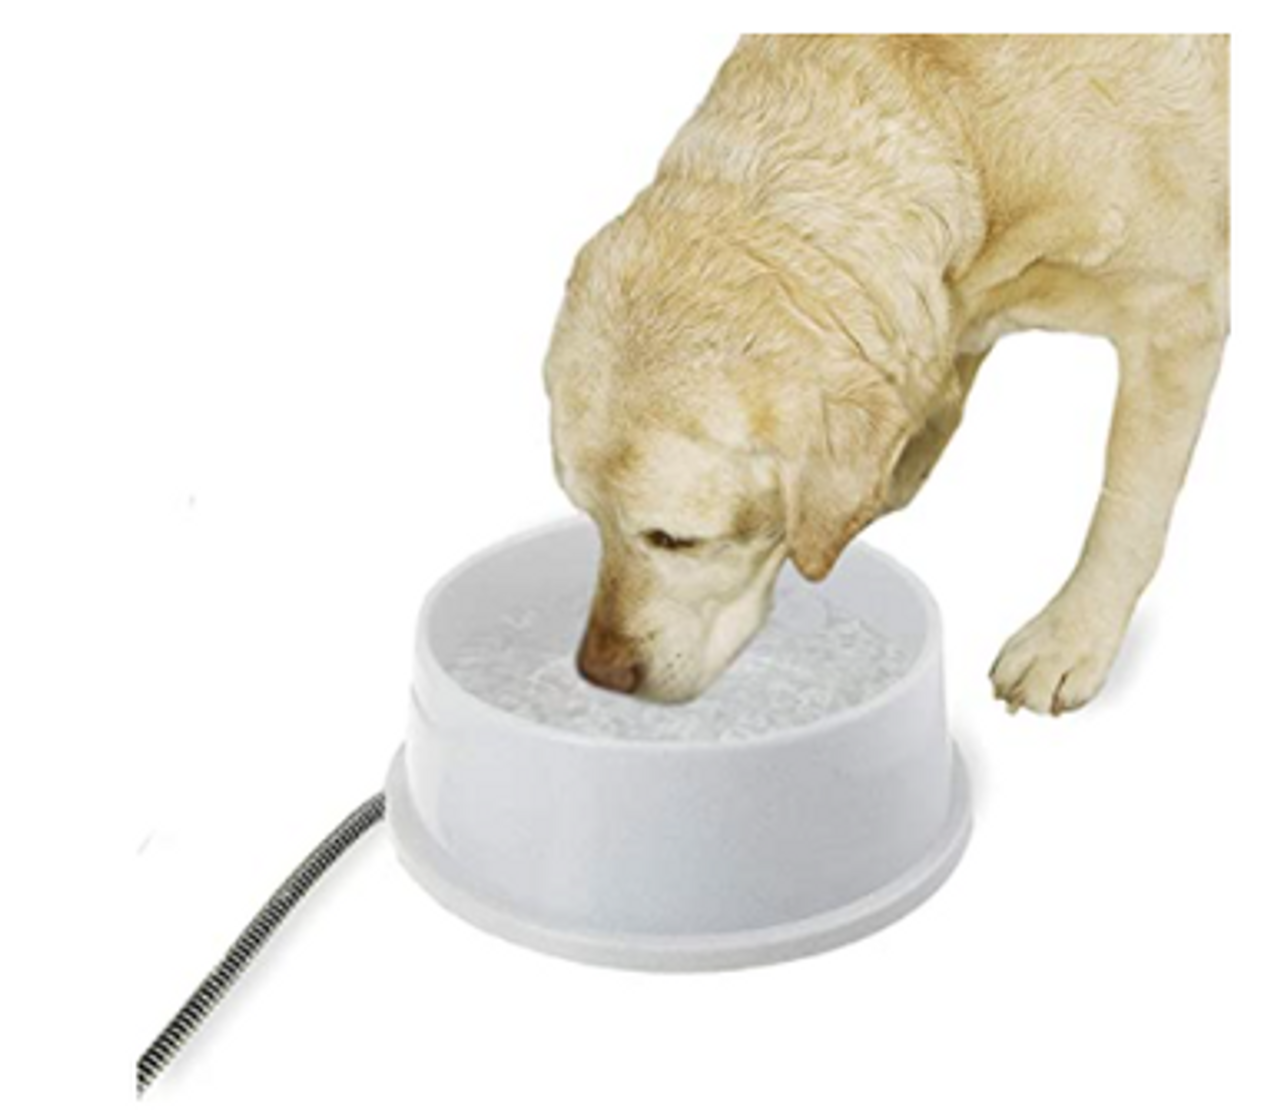 K&H Pet Products Thermal-Bowl Heated Dog Water Bowl, 25w 1.5 gal